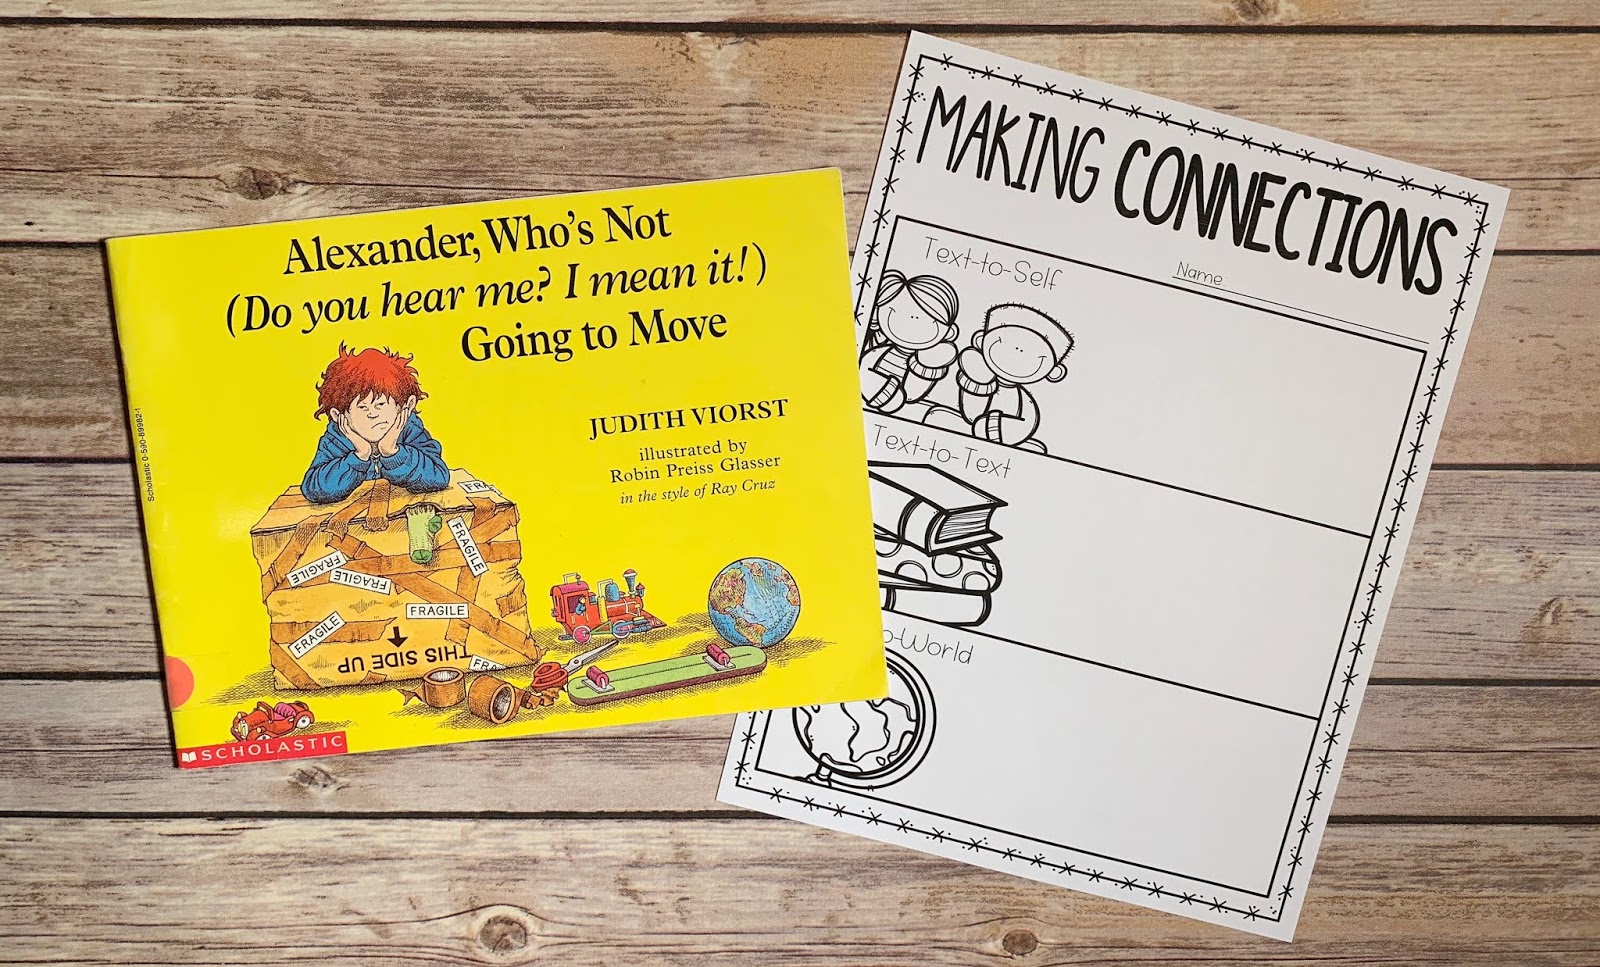 Mentor text with text "Alexander, Who's Not (Do you hear me? I mean it!) Going to Move" and graphic organizer with text "Making Connections"